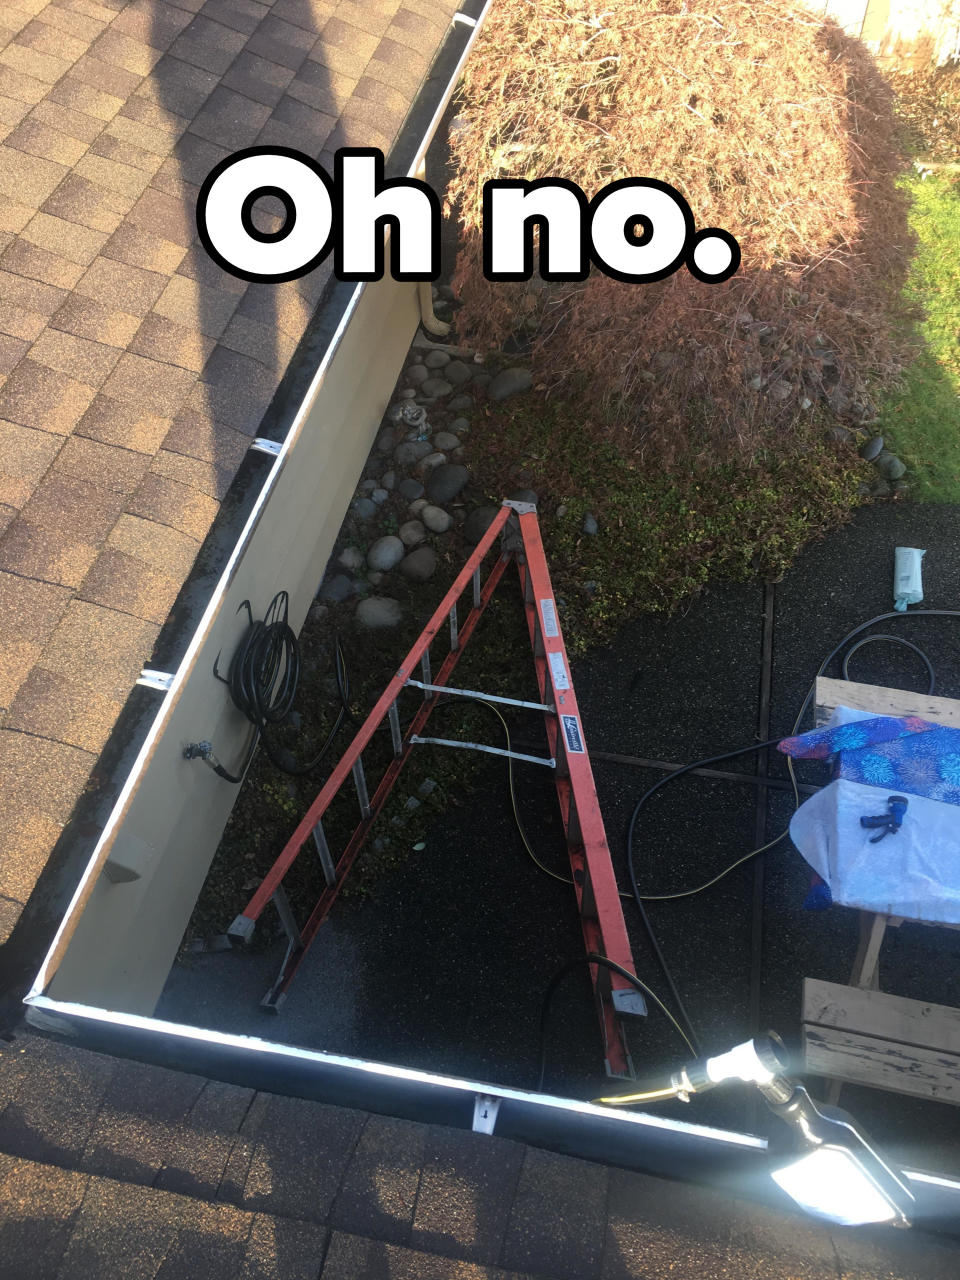 A tipped-over ladder seen from a roof, with text saying, "Oh no"